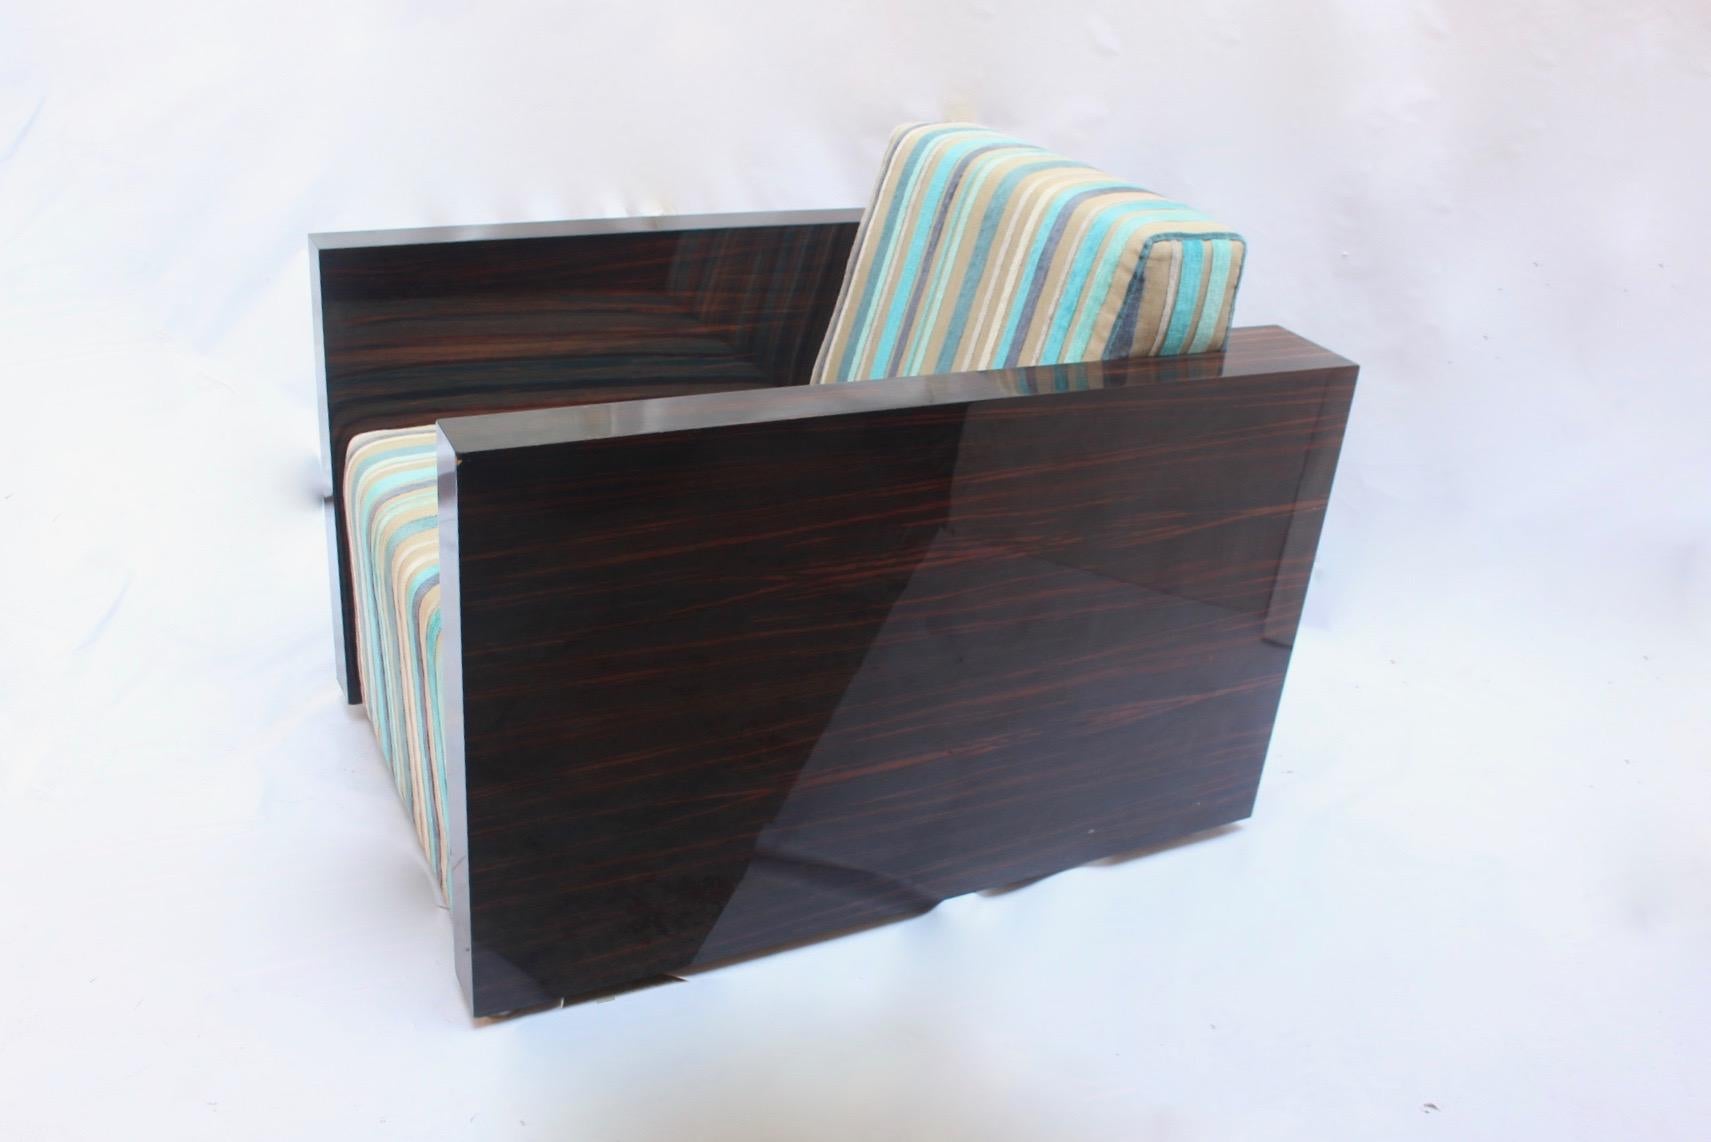 Stainless Steel Art Deco Macassar Ebony  Lounge Chairs “Gael” by Fermín Verdeguer for Darc, 2002 For Sale